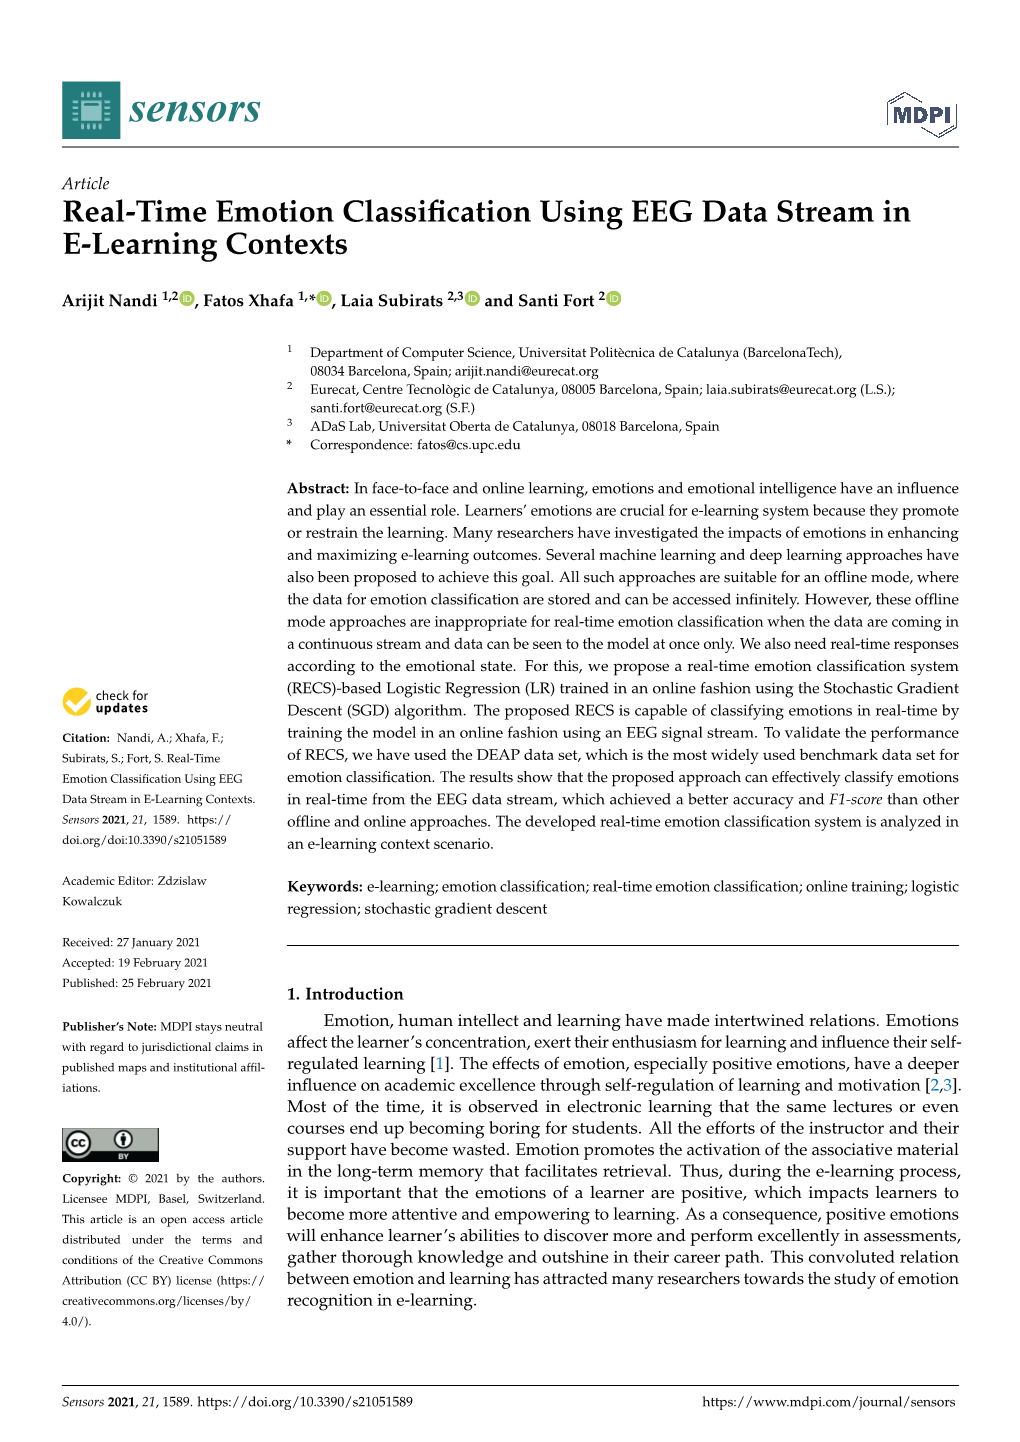 Real-Time Emotion Classification Using EEG Data Stream in E-Learning Contexts